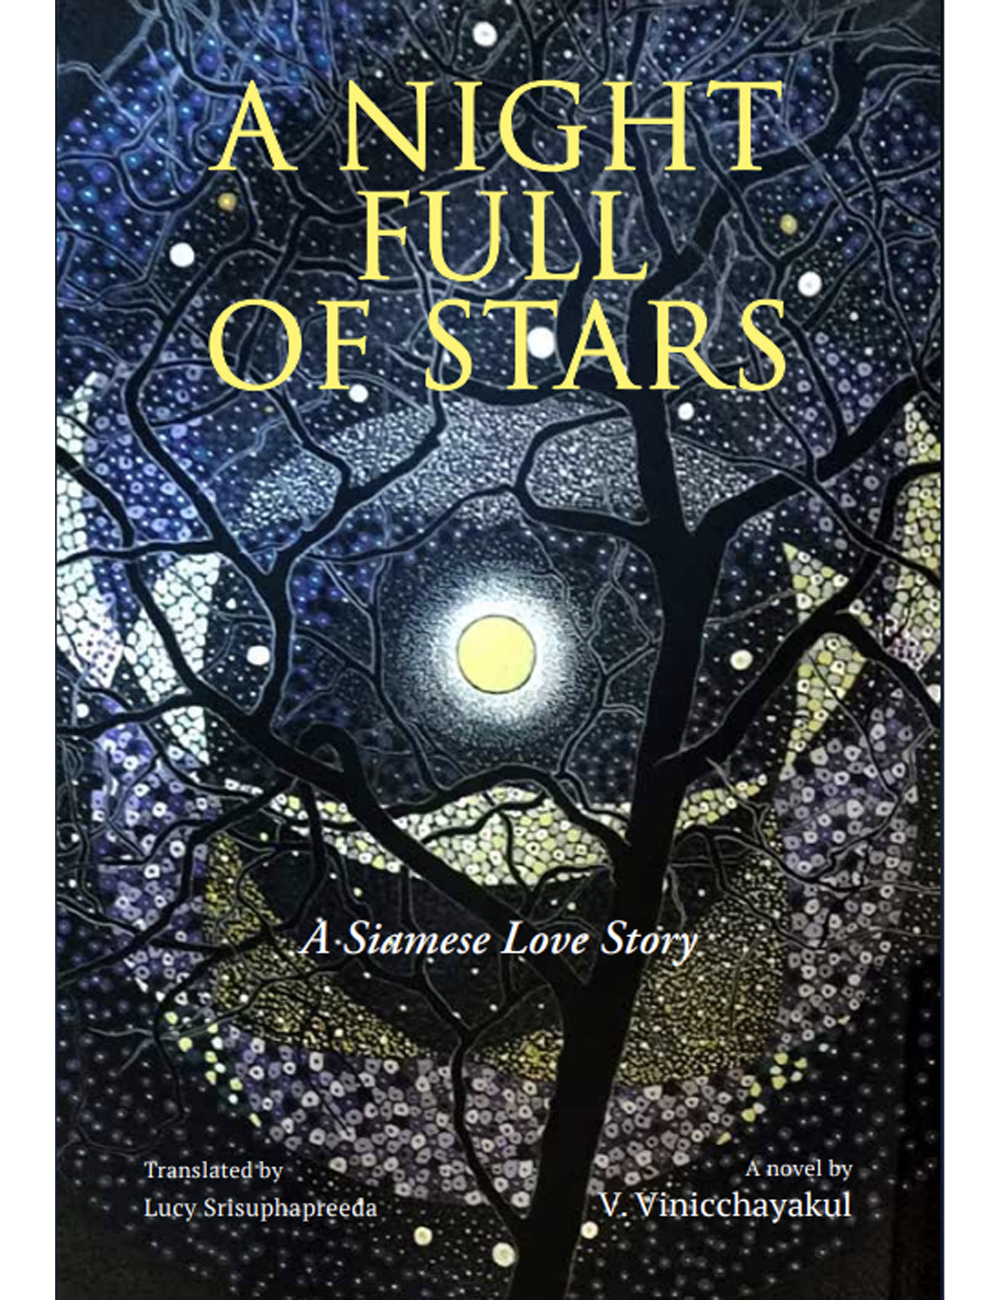 A Night Full of Stars A Siamese Love Story